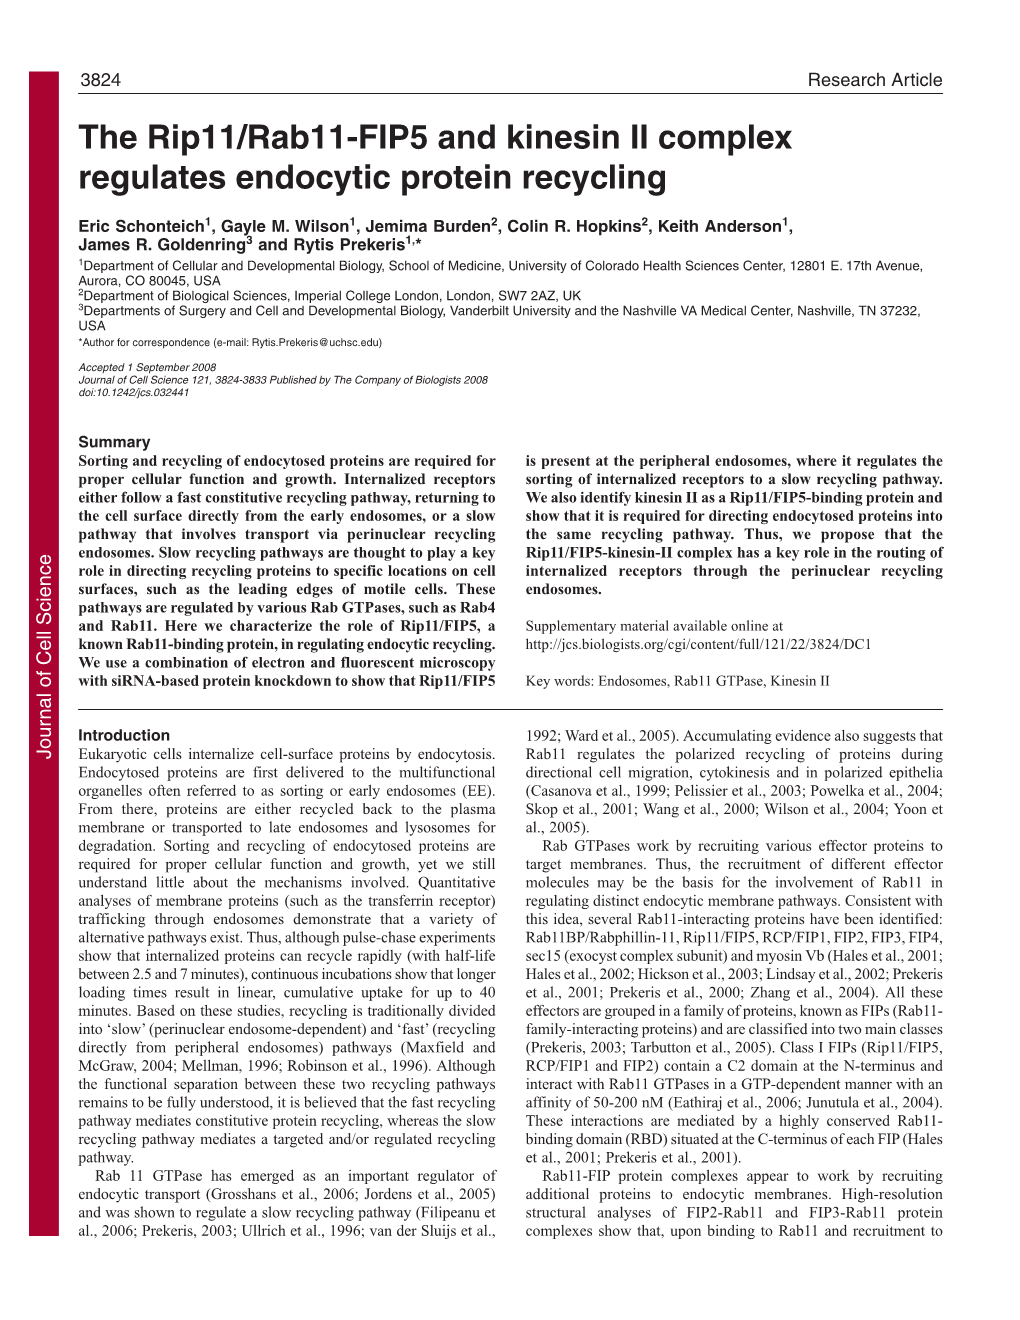 The Rip11/Rab11-FIP5 and Kinesin II Complex Regulates Endocytic Protein Recycling